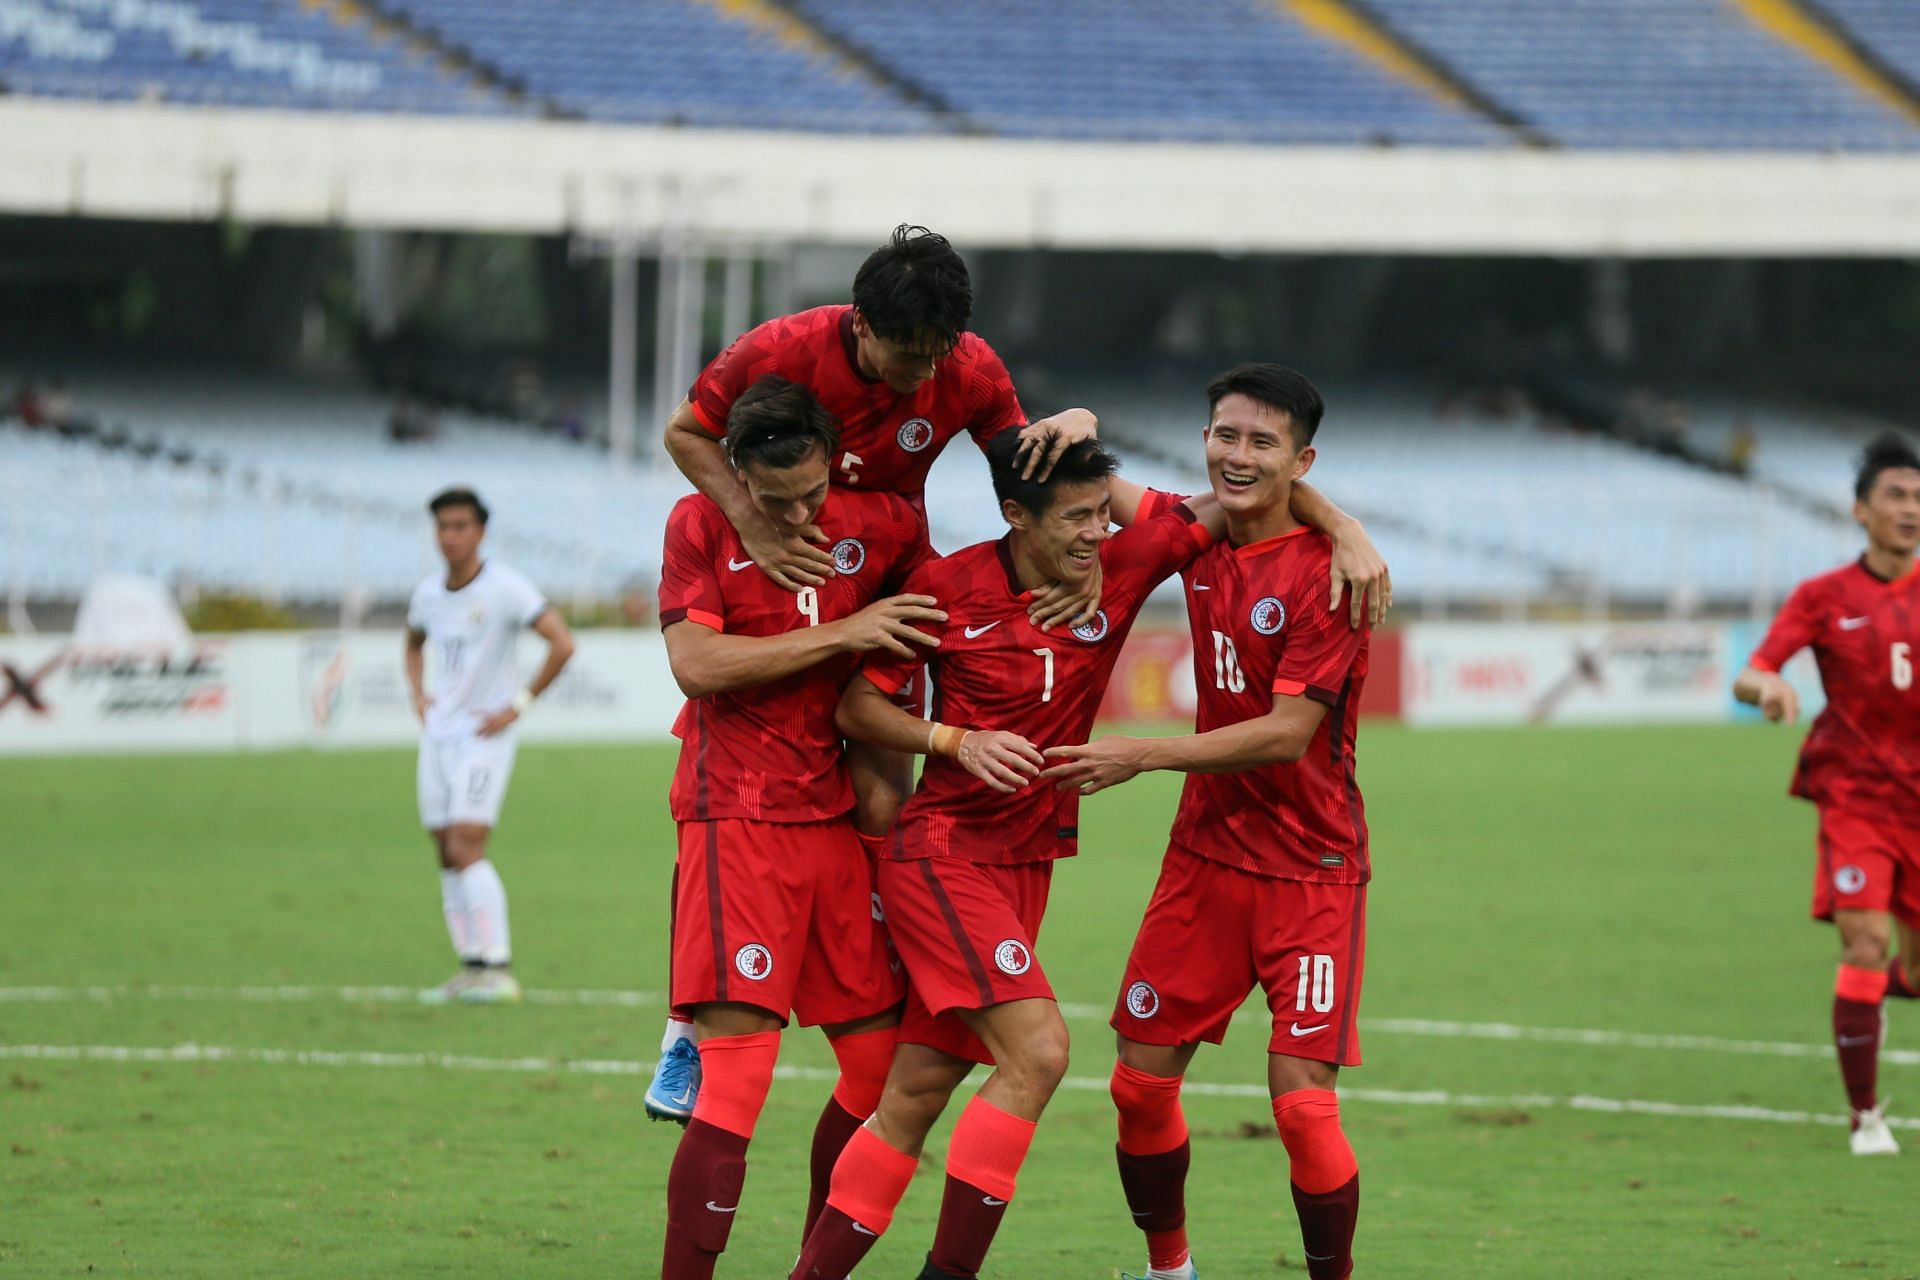 Hong Kong have beaten Bhutan in both their previous two clashes 